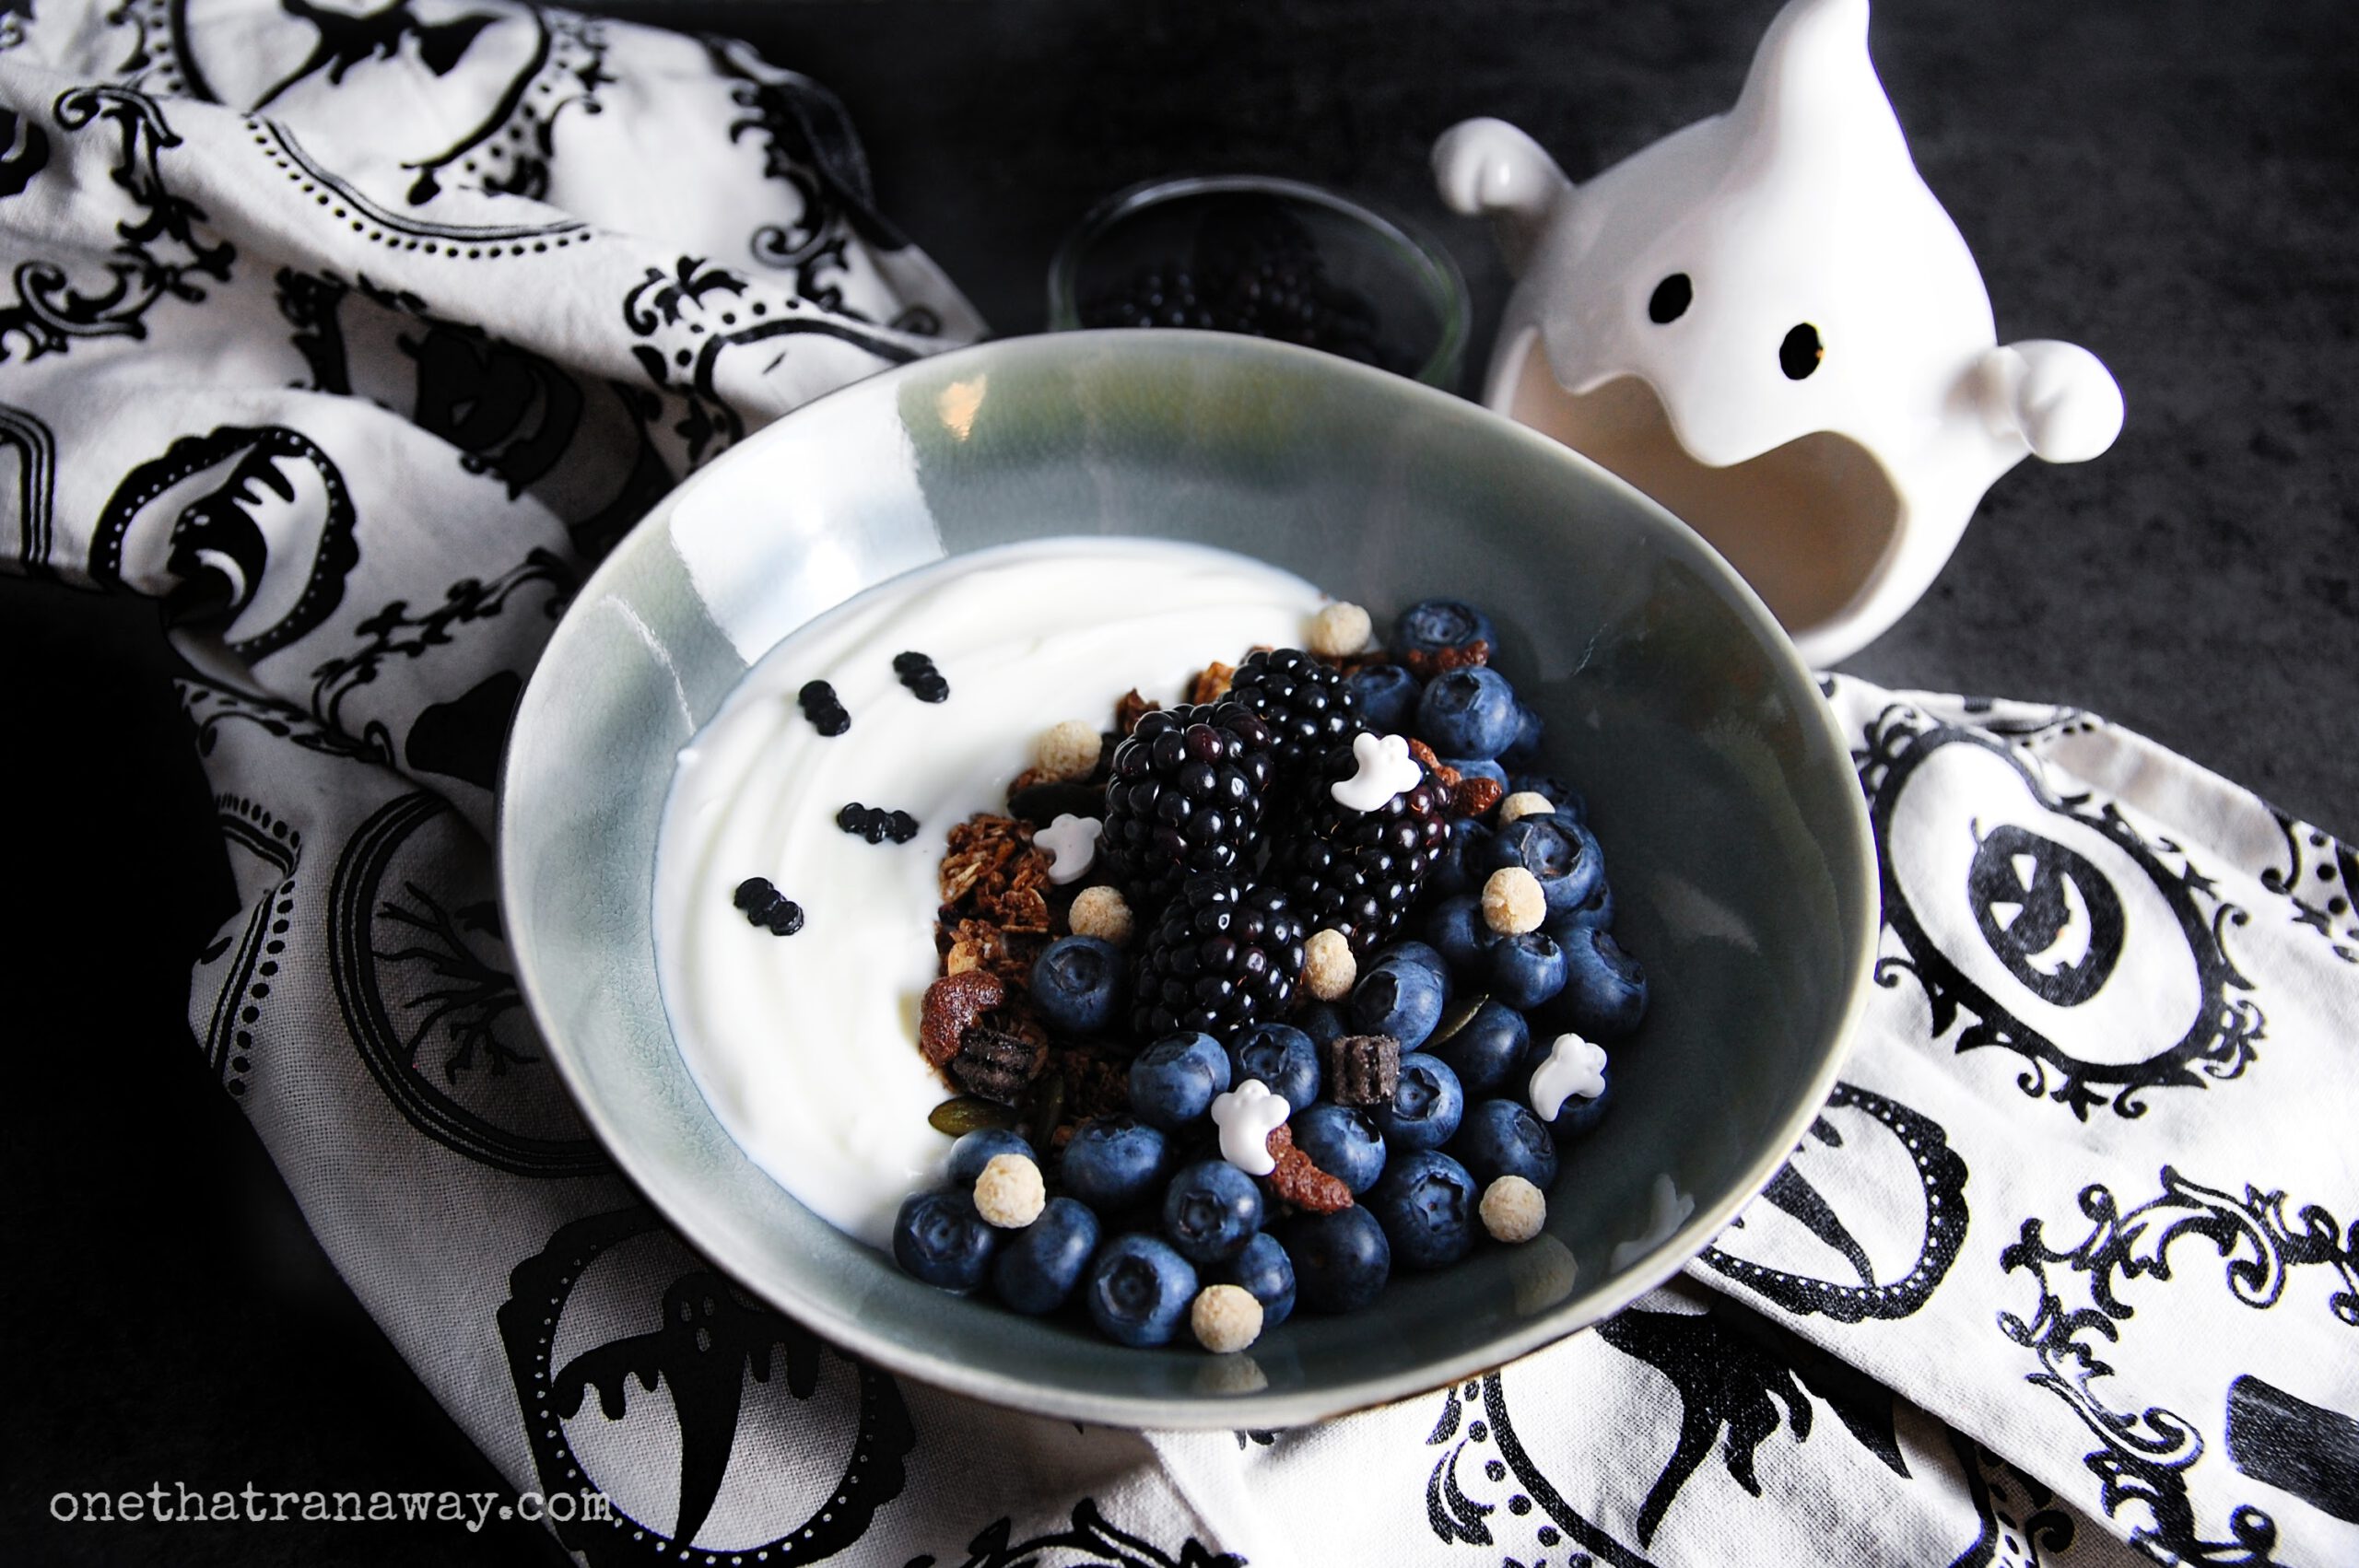 a bowl of yoghurt and cereal forming a crescent moon on top of a beige and black kitchen towel with a ceramic ghost in the background